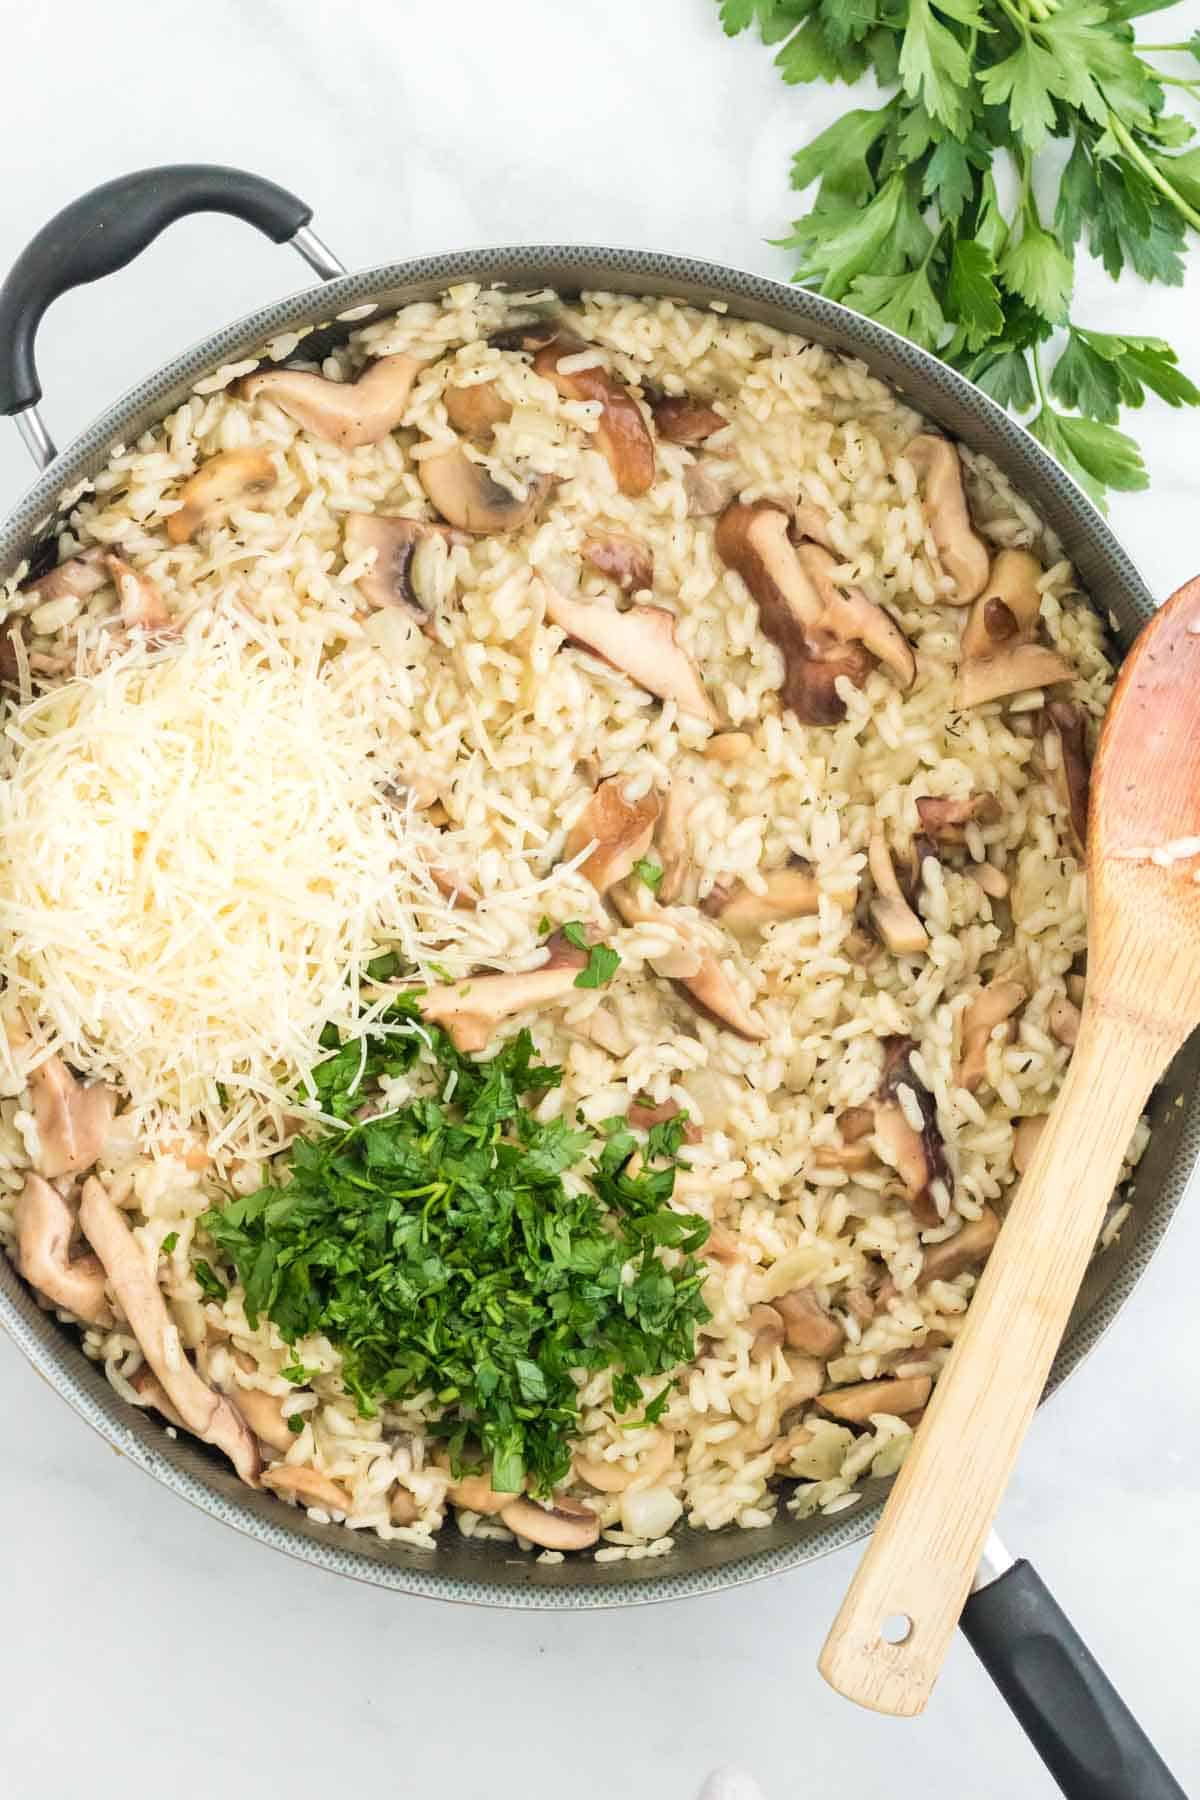 Sauteed mushrooms, parsley, and parmesan cheese added to risotto in a skillet.